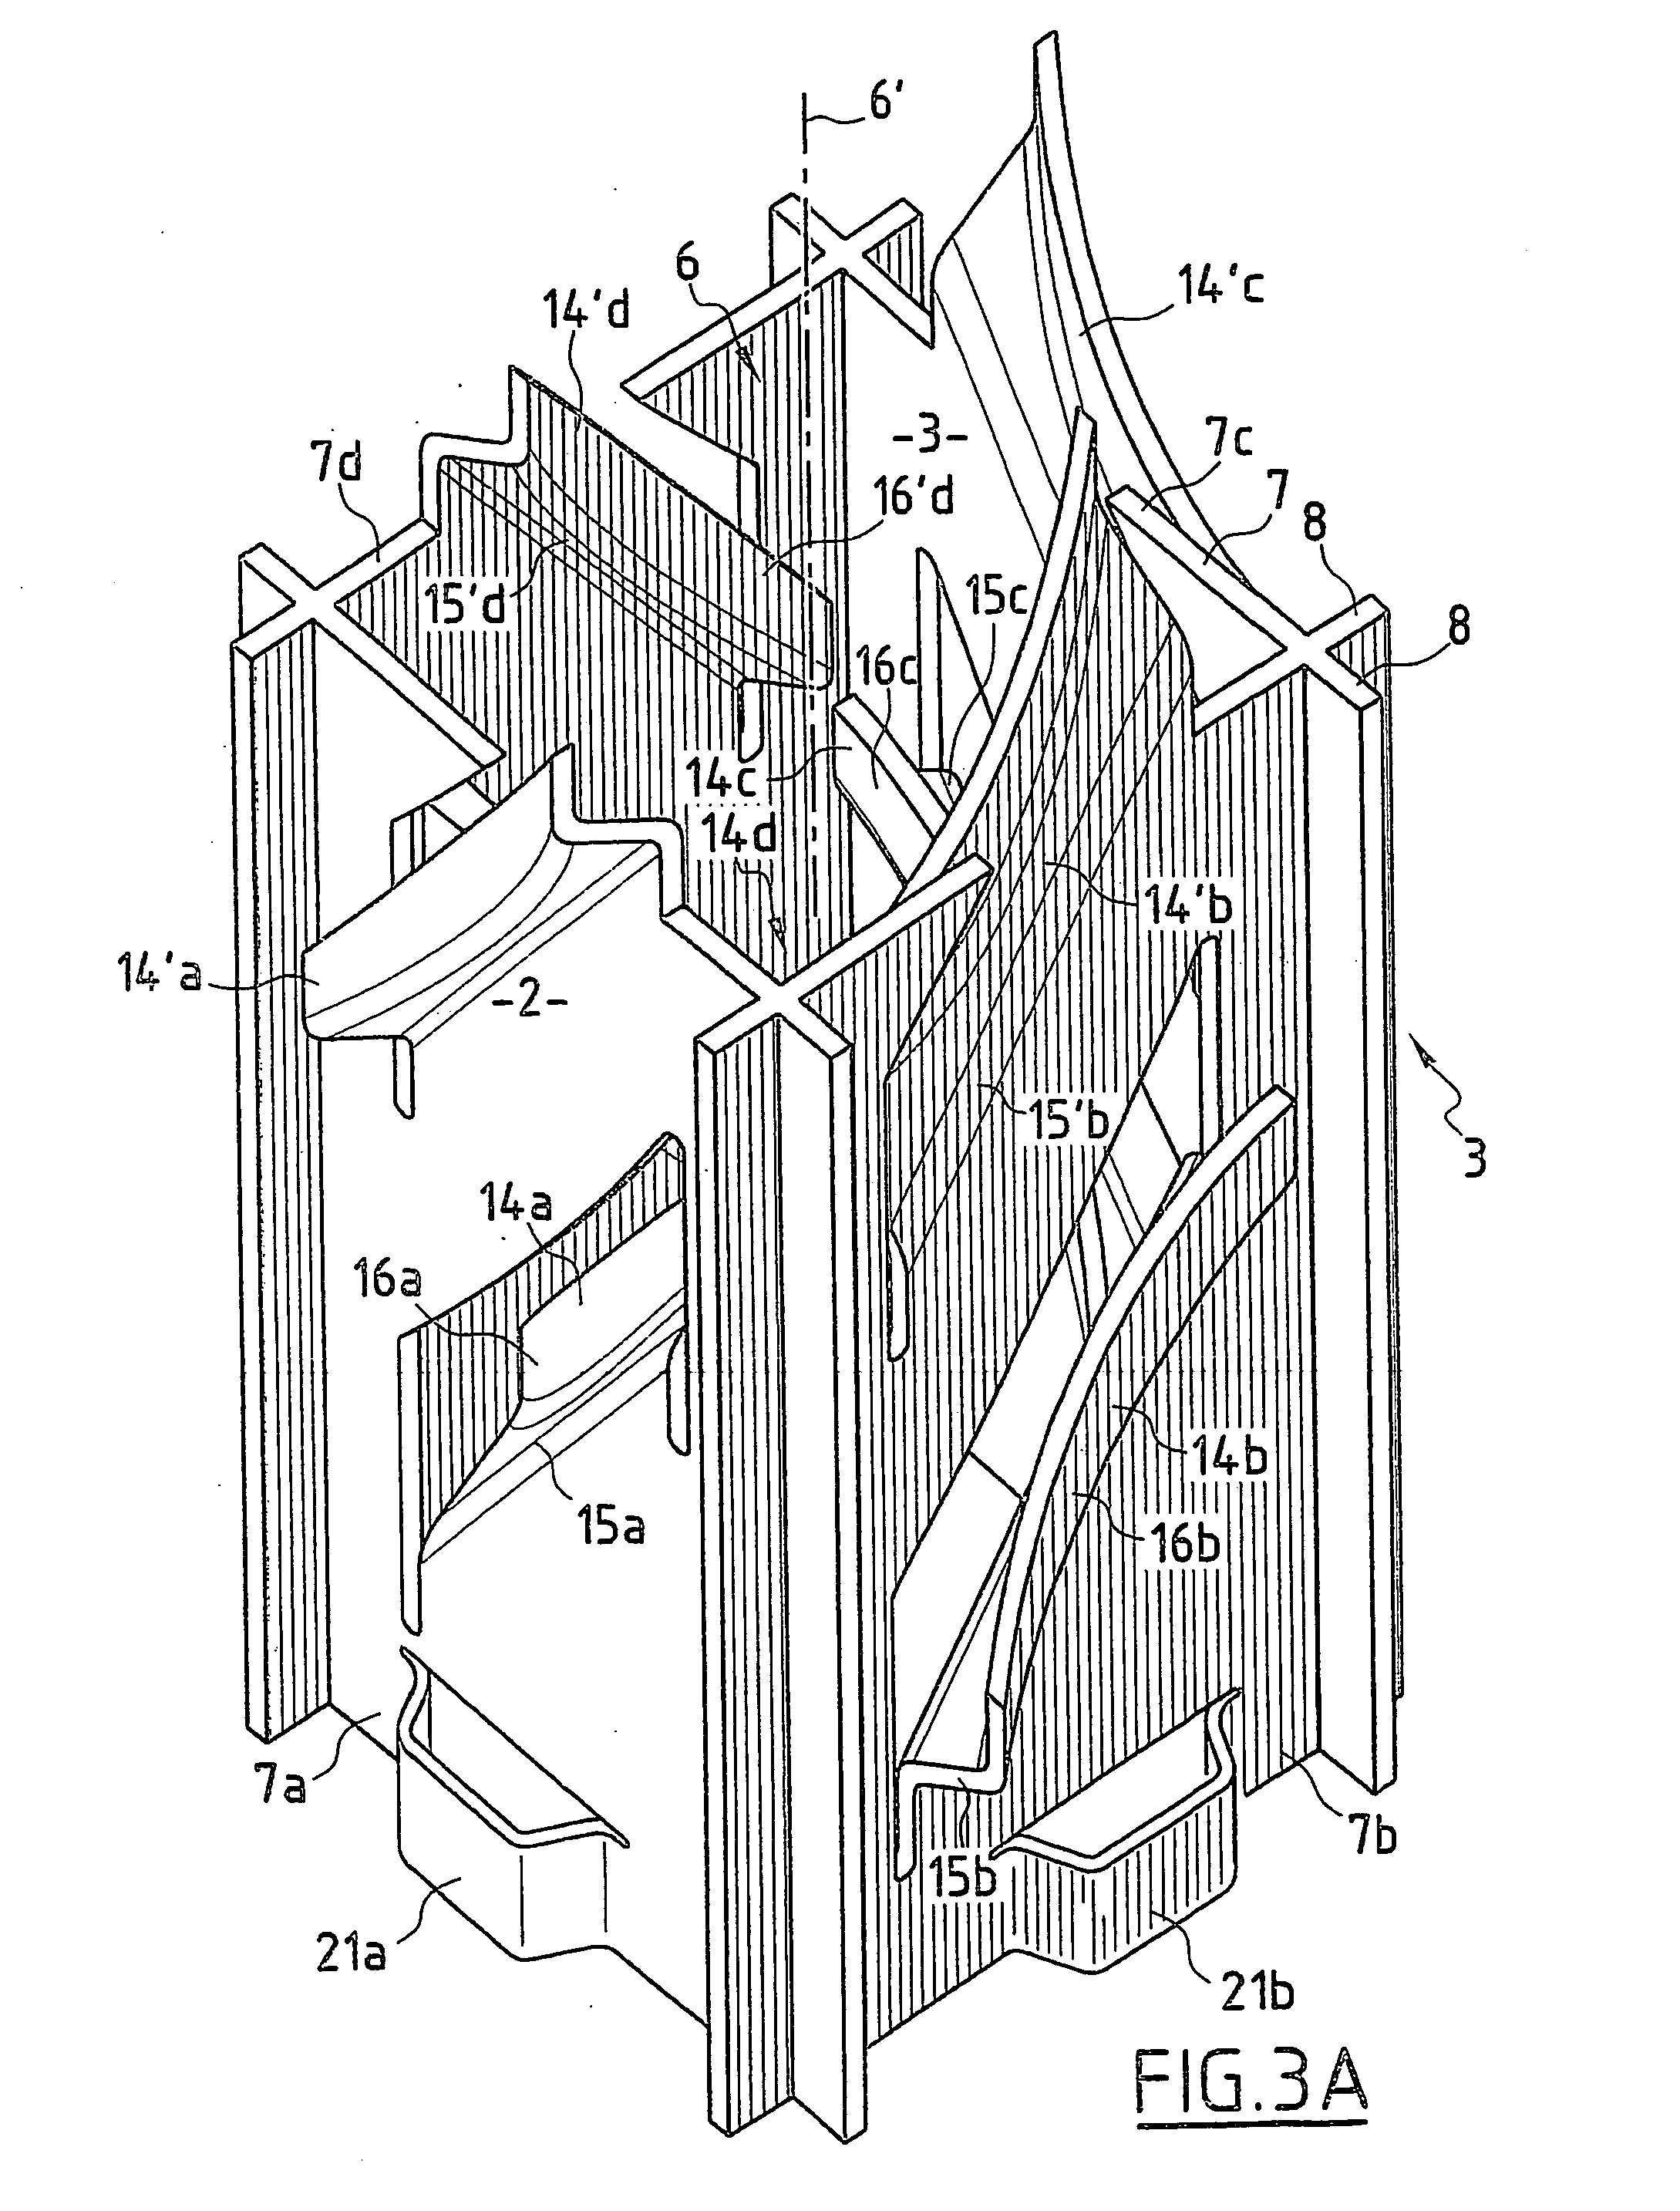 Spacer grid for a fuel unit in a nuclear reactor cooled by light water